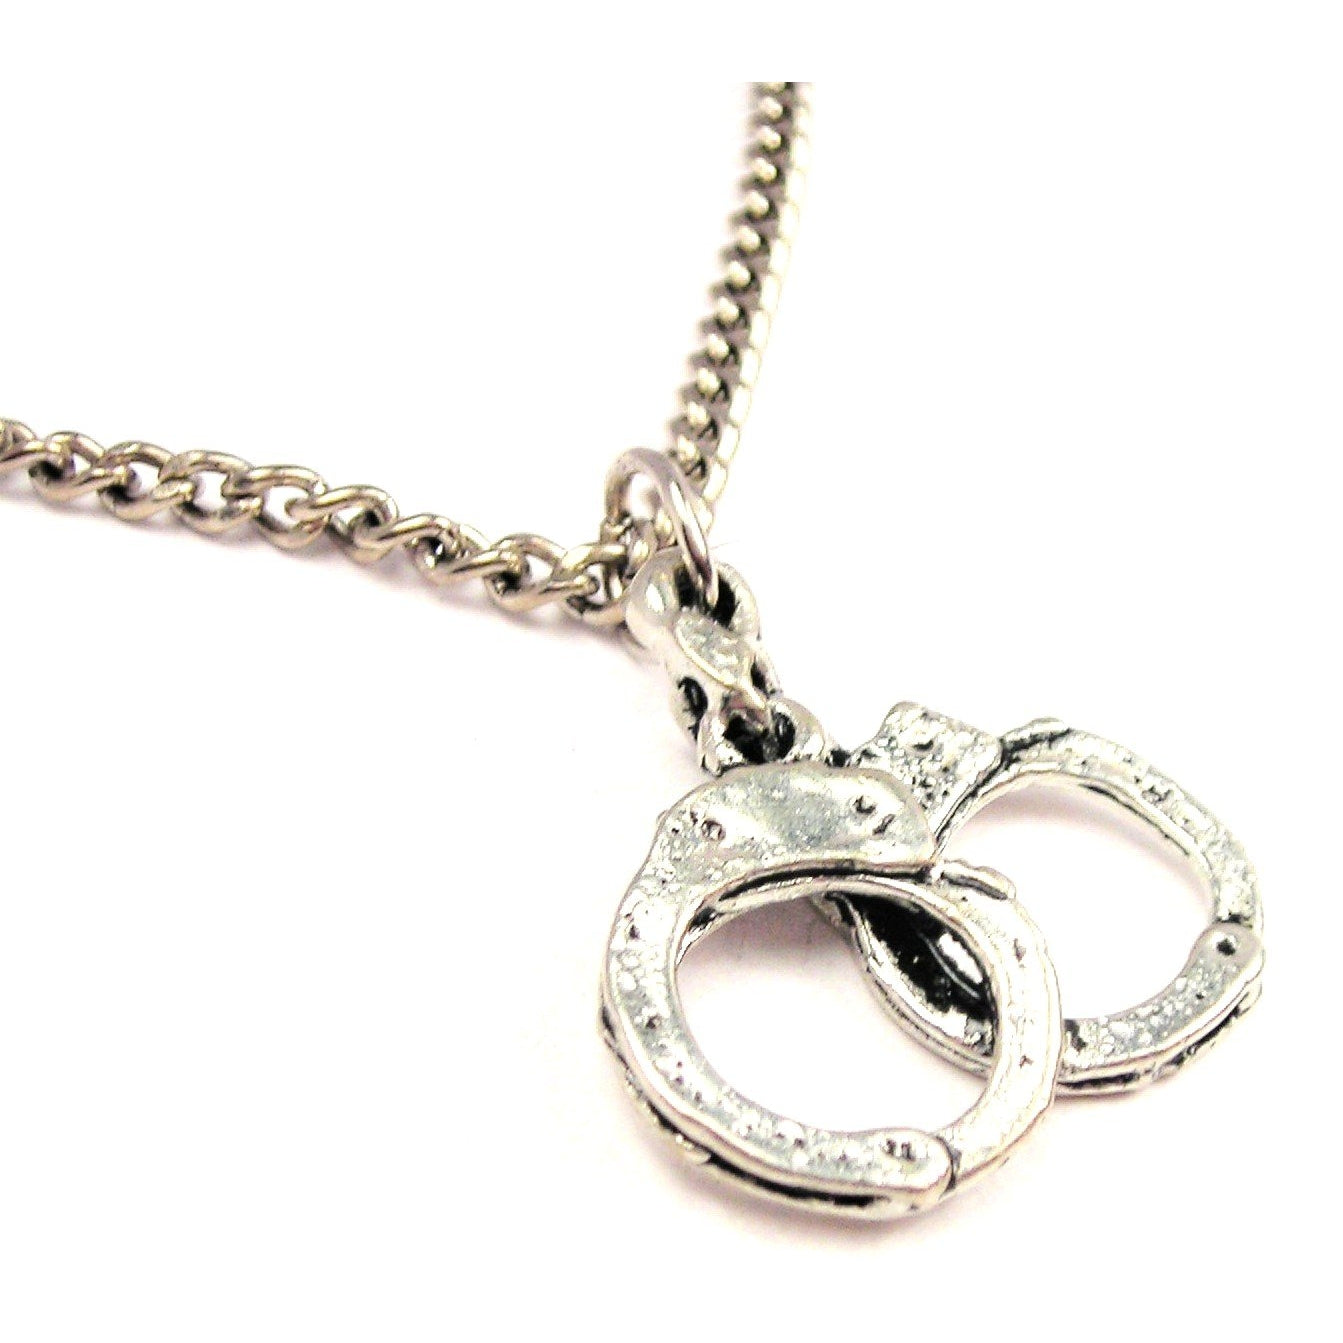 Large Handcuffs Single Charm Necklace